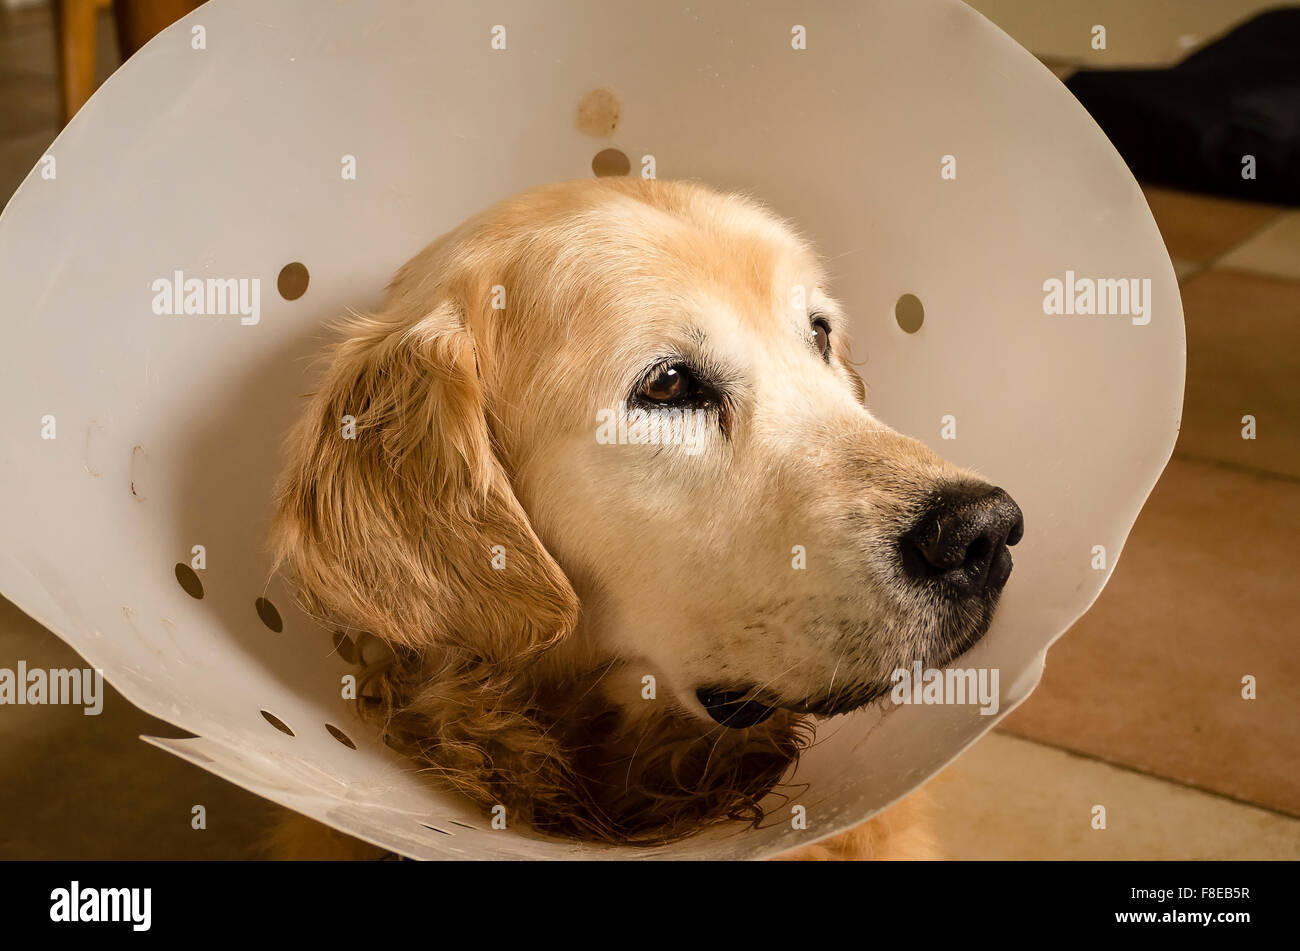 Golden retriever dog wearing a surgical collar after abdominal operation Stock Photo